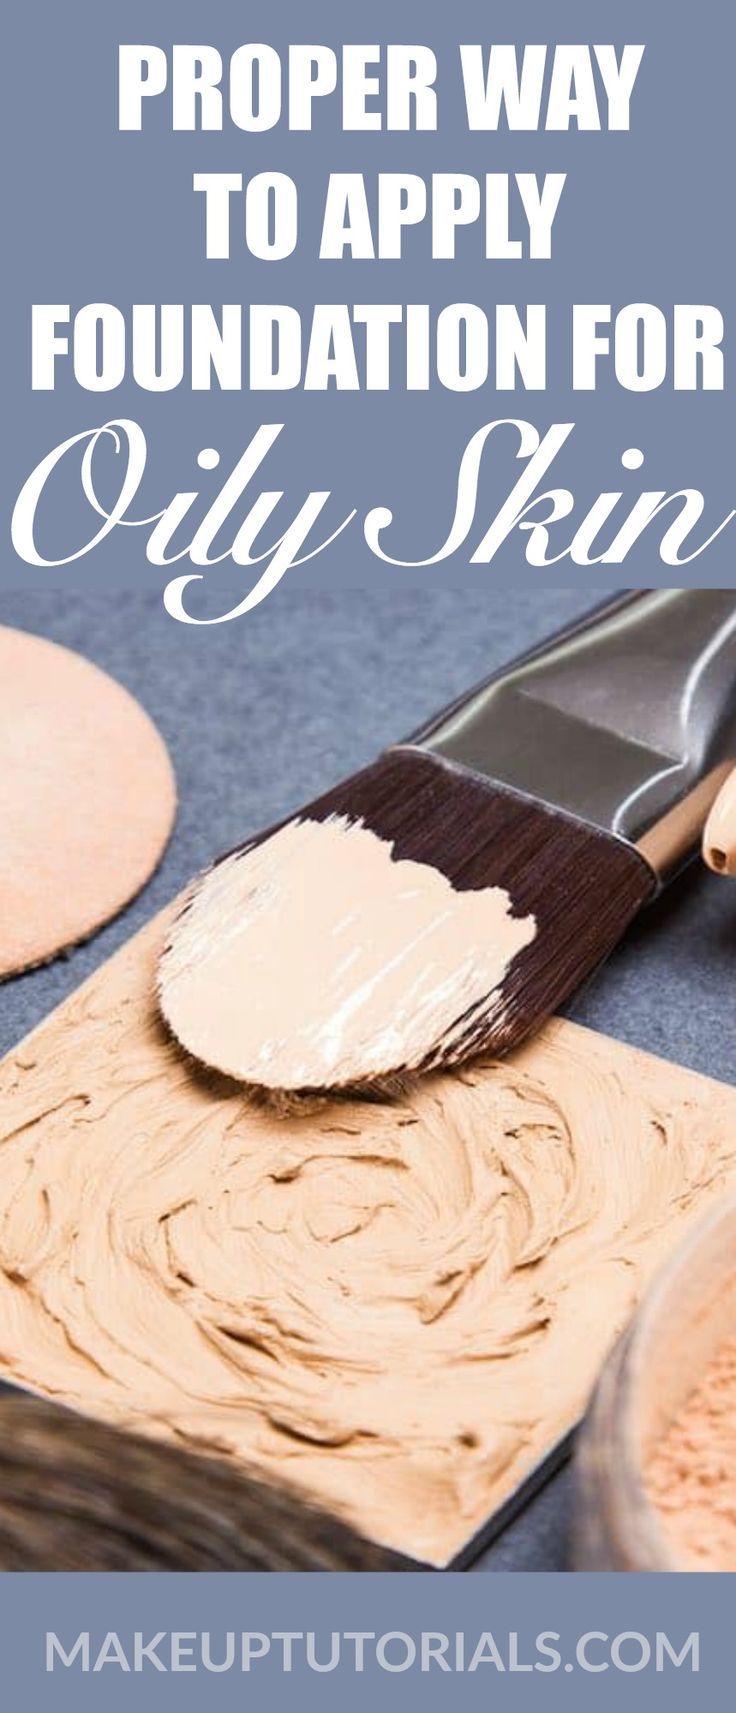 Fool-Proof Ways to Make Foundation for Oily Skin Work | Makeup Tips & Tricks...